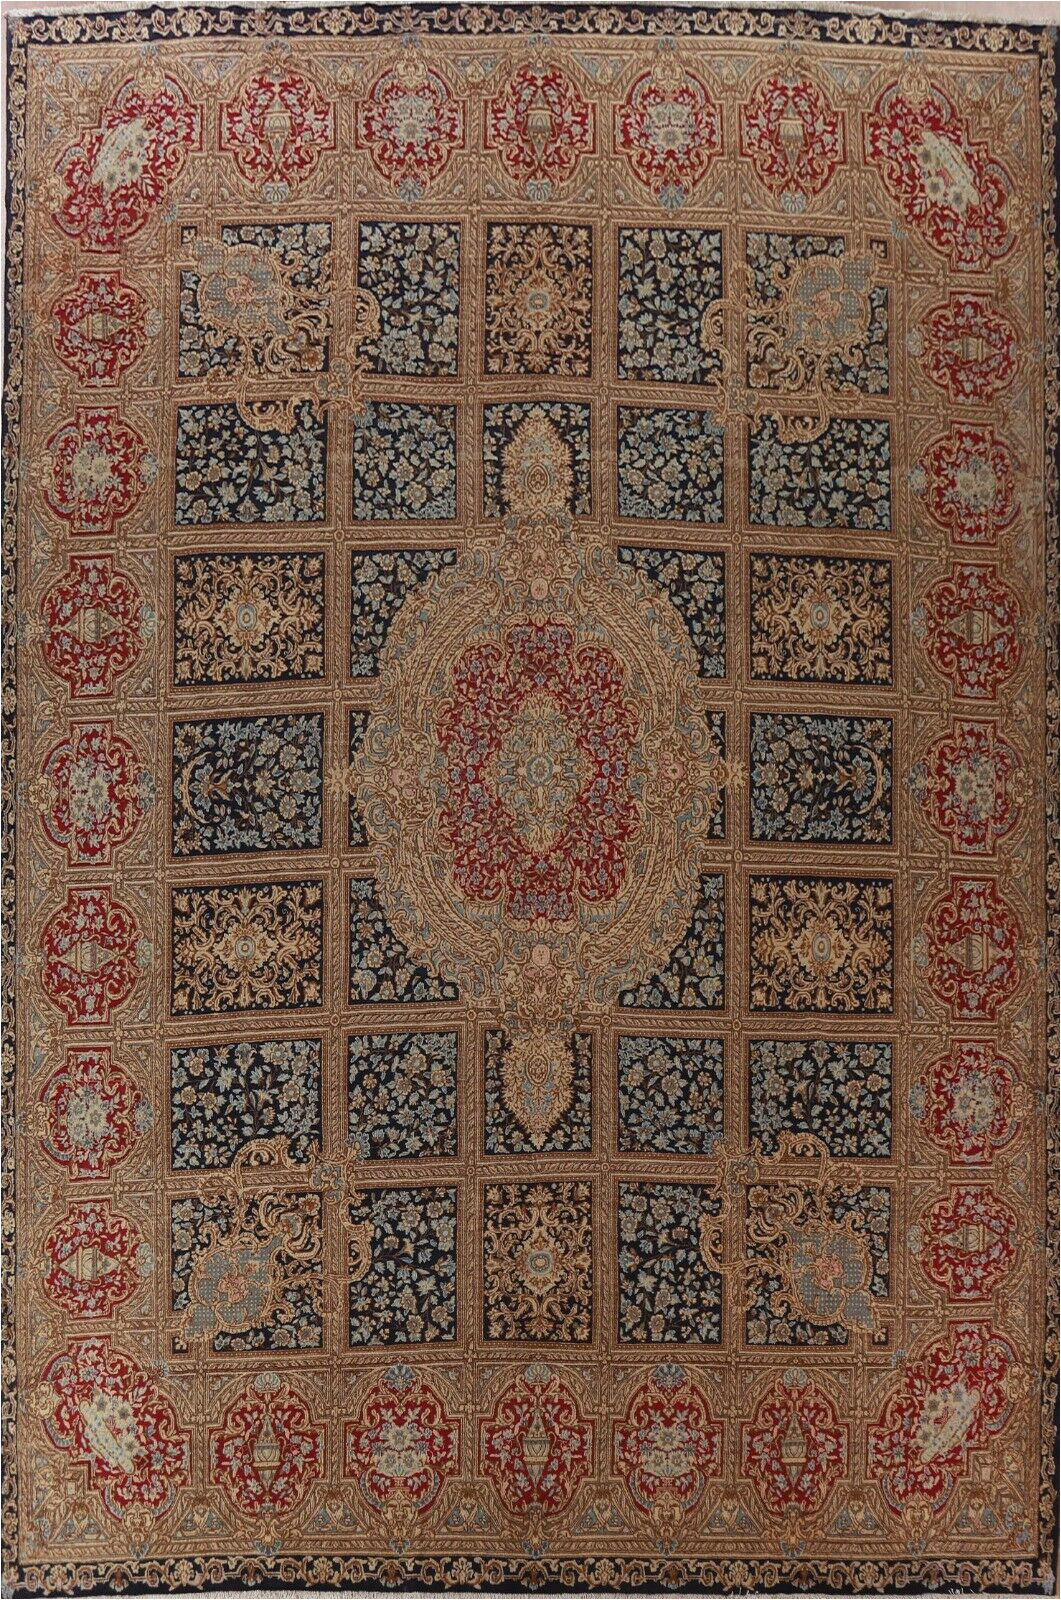 13 X 16 area Rugs Unique Design Geometric Kirman 13×16 area Rug Palace Hand-knotted Wool Carpet